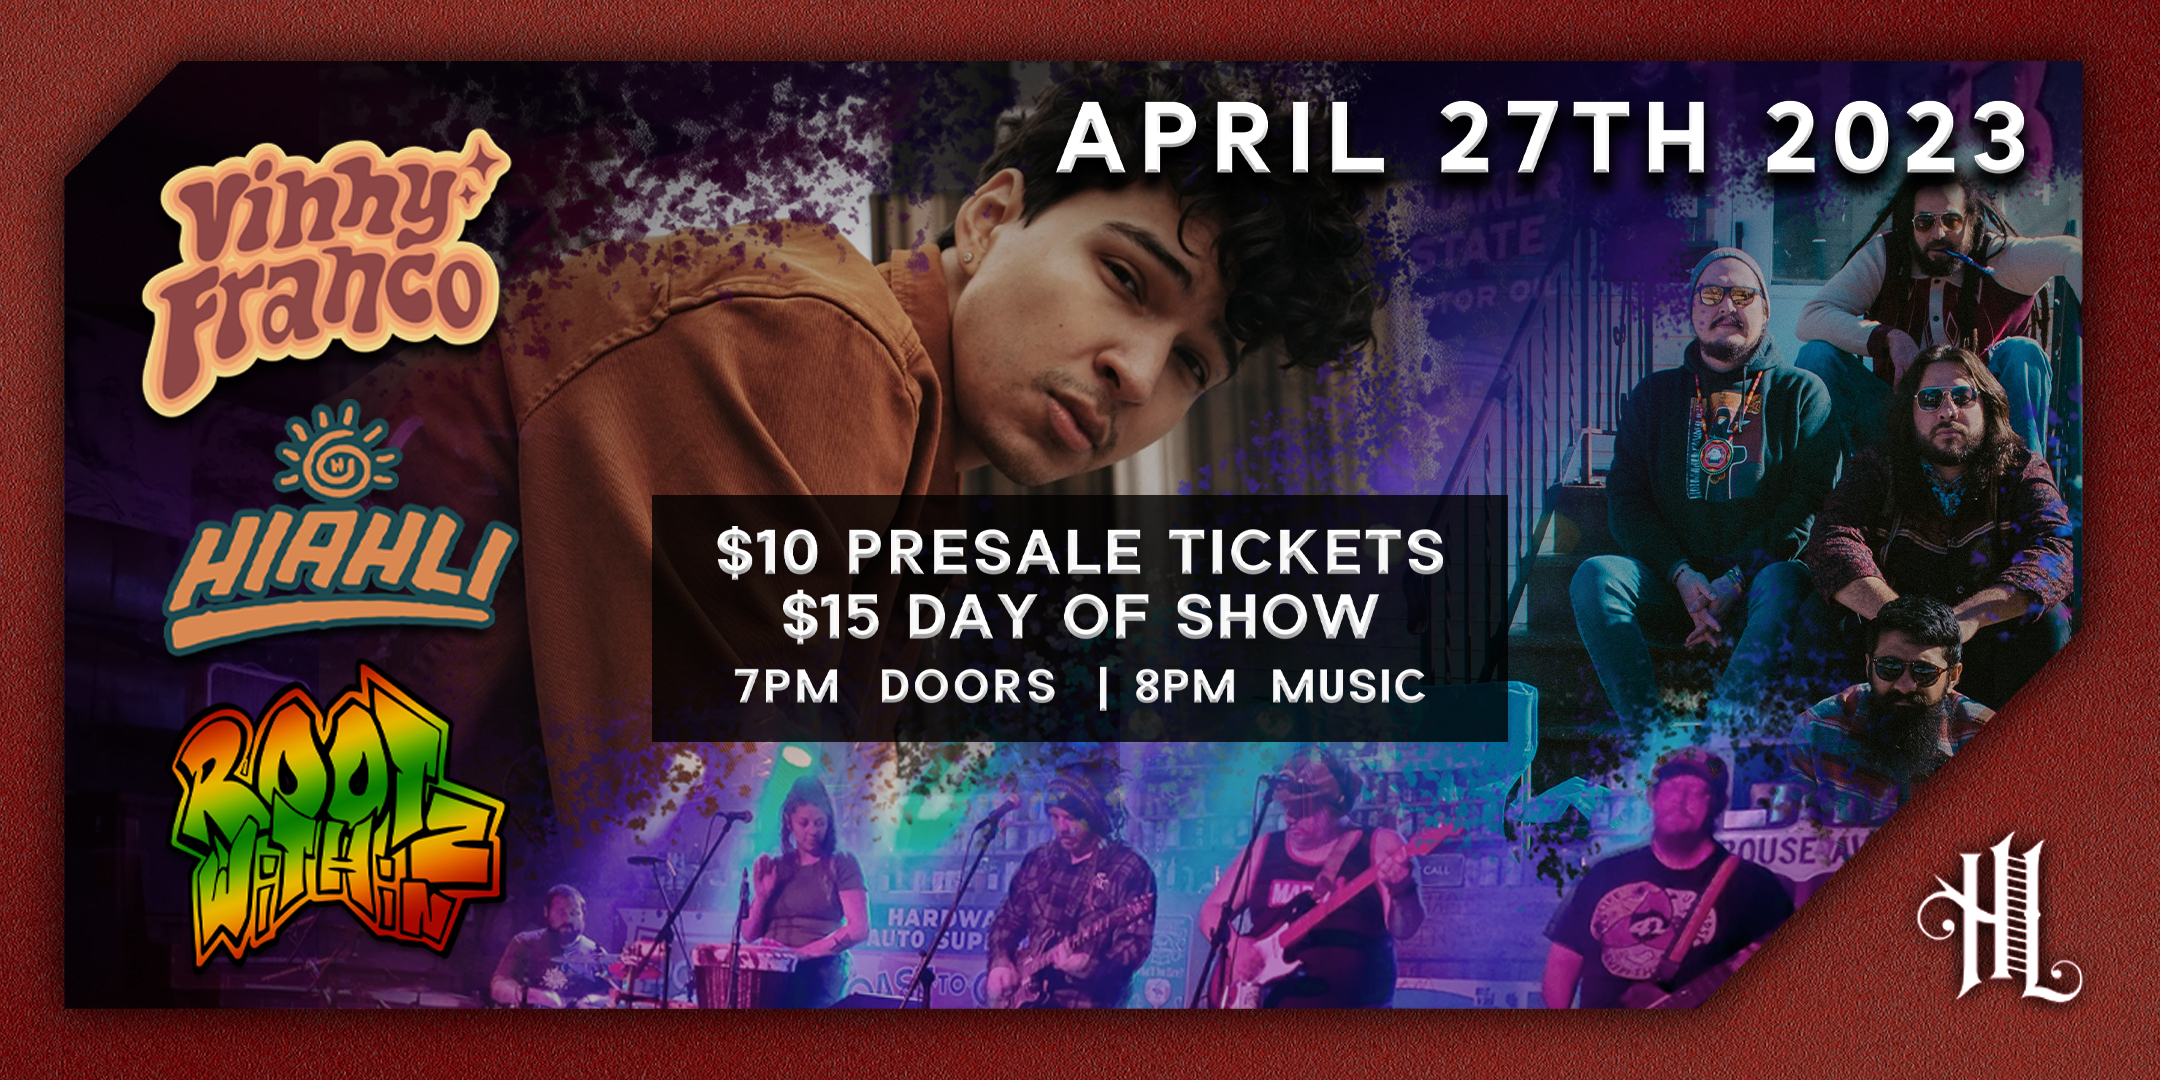 Vinny Franco, Hiahli, Rootz Within Thursday, April 27 The Hook and Ladder Theater Doors 7:00pm :: Music 8:00:: 21+ General Admission * $10 ADV/ $15 DOS * Does not include fees NO REFUNDS